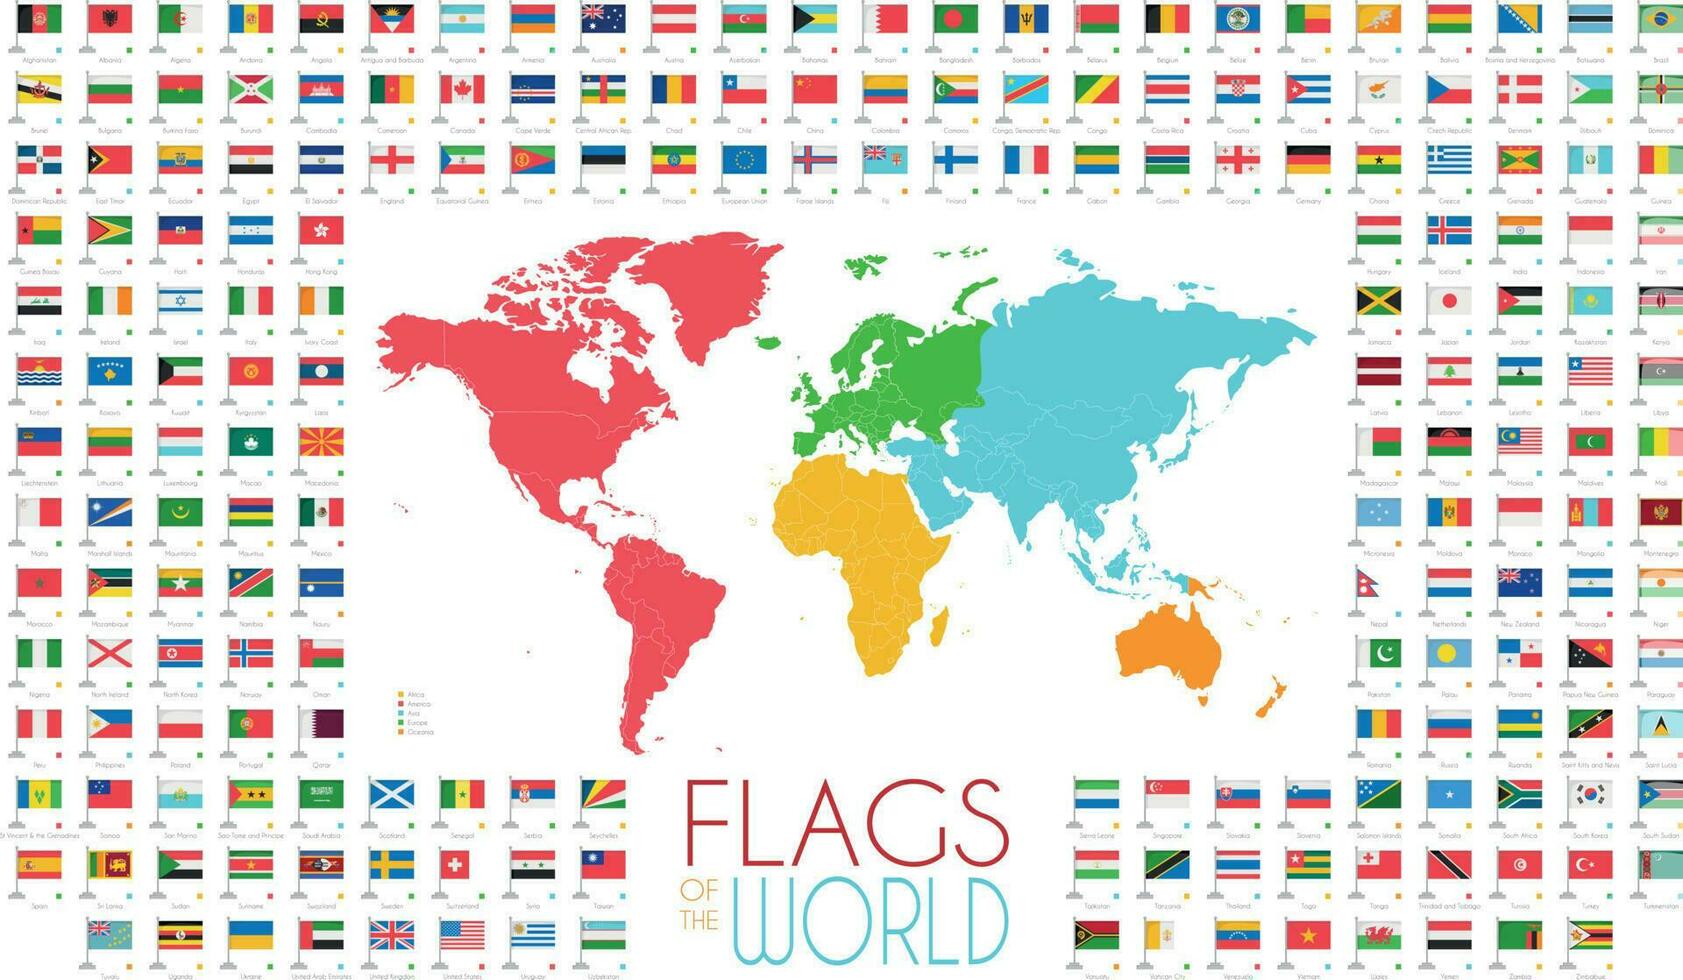 204 world flags with world map by continents vector illustration